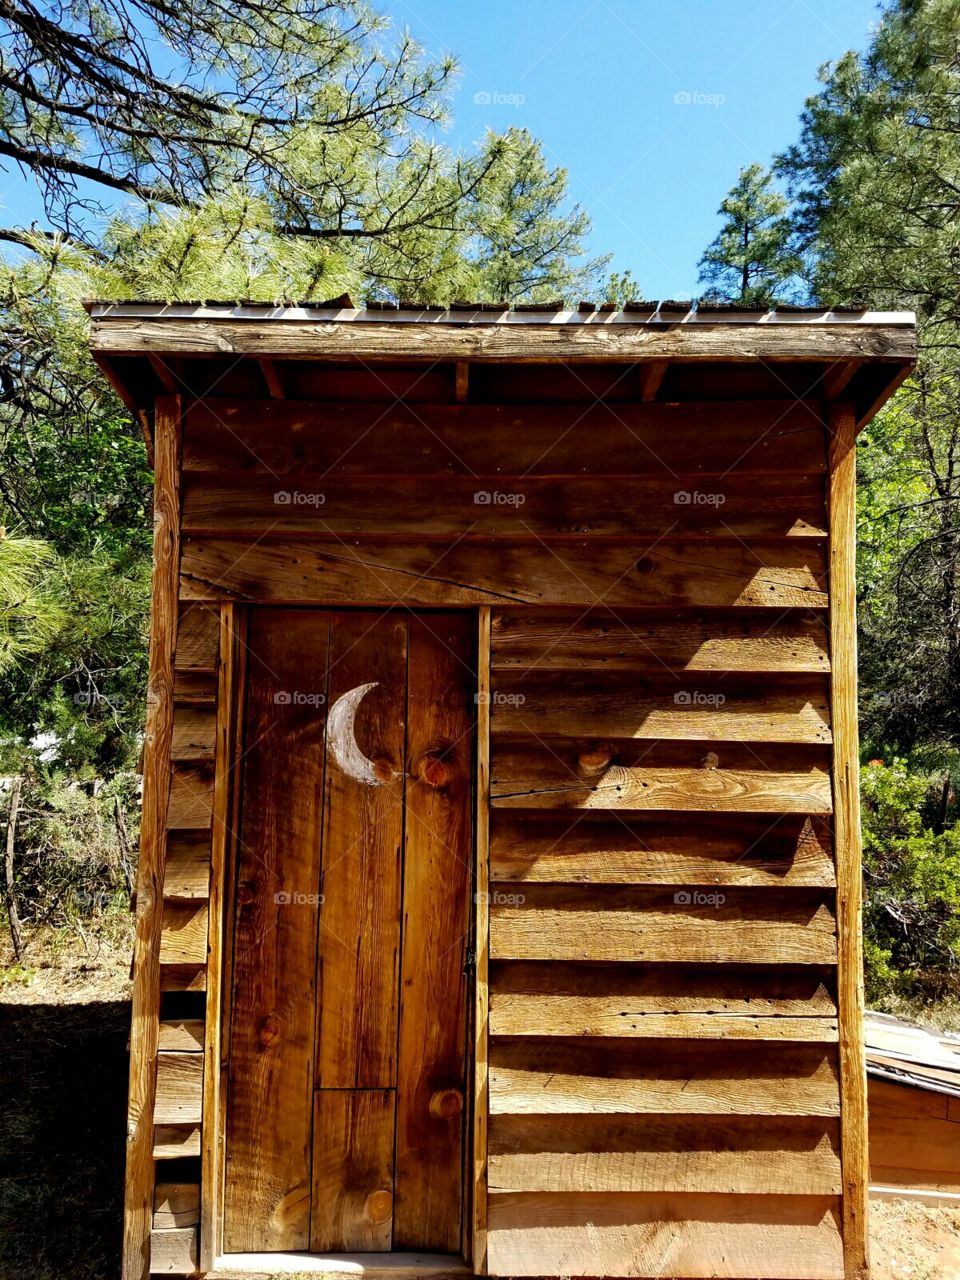 Strawberry Schoolhouse Outhouse